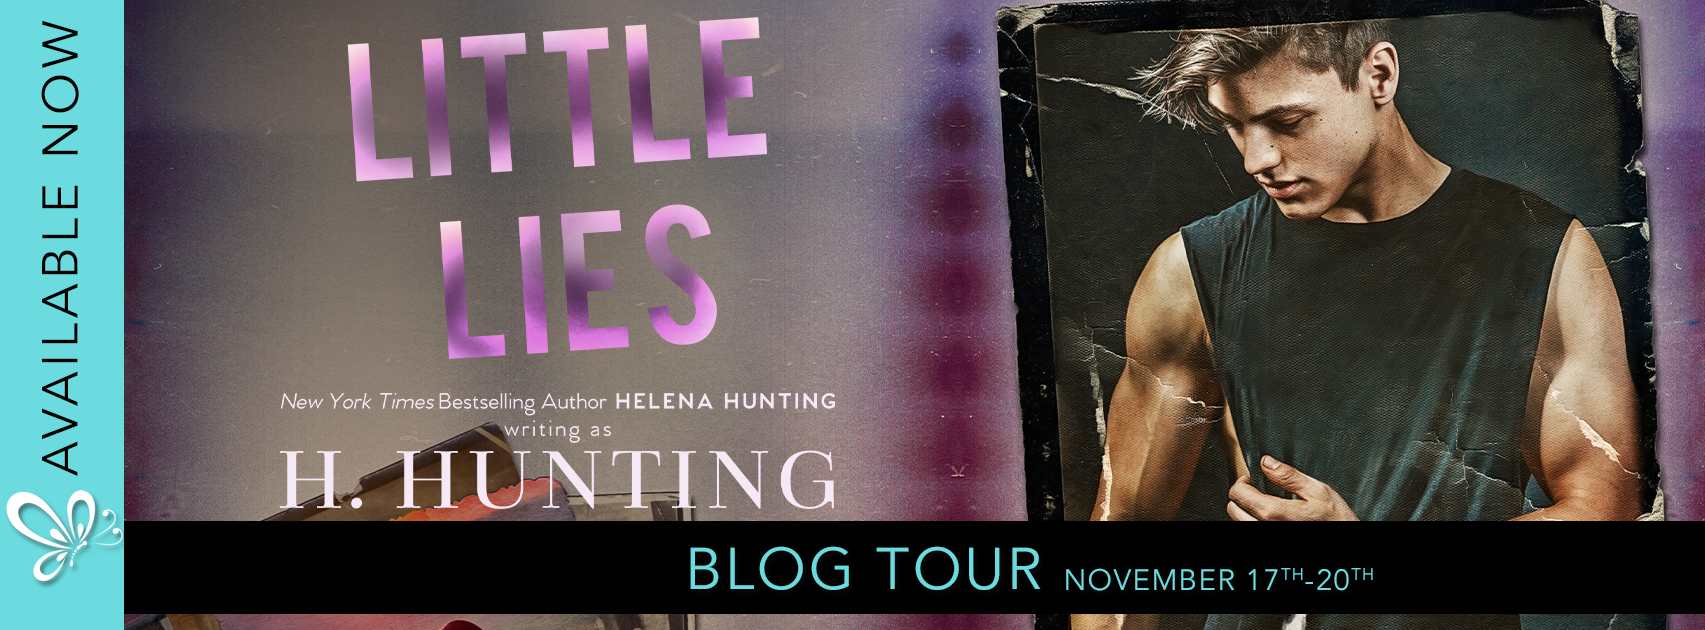 Little Lies by H. Hunting | Holy Angsty Romance ARC Review